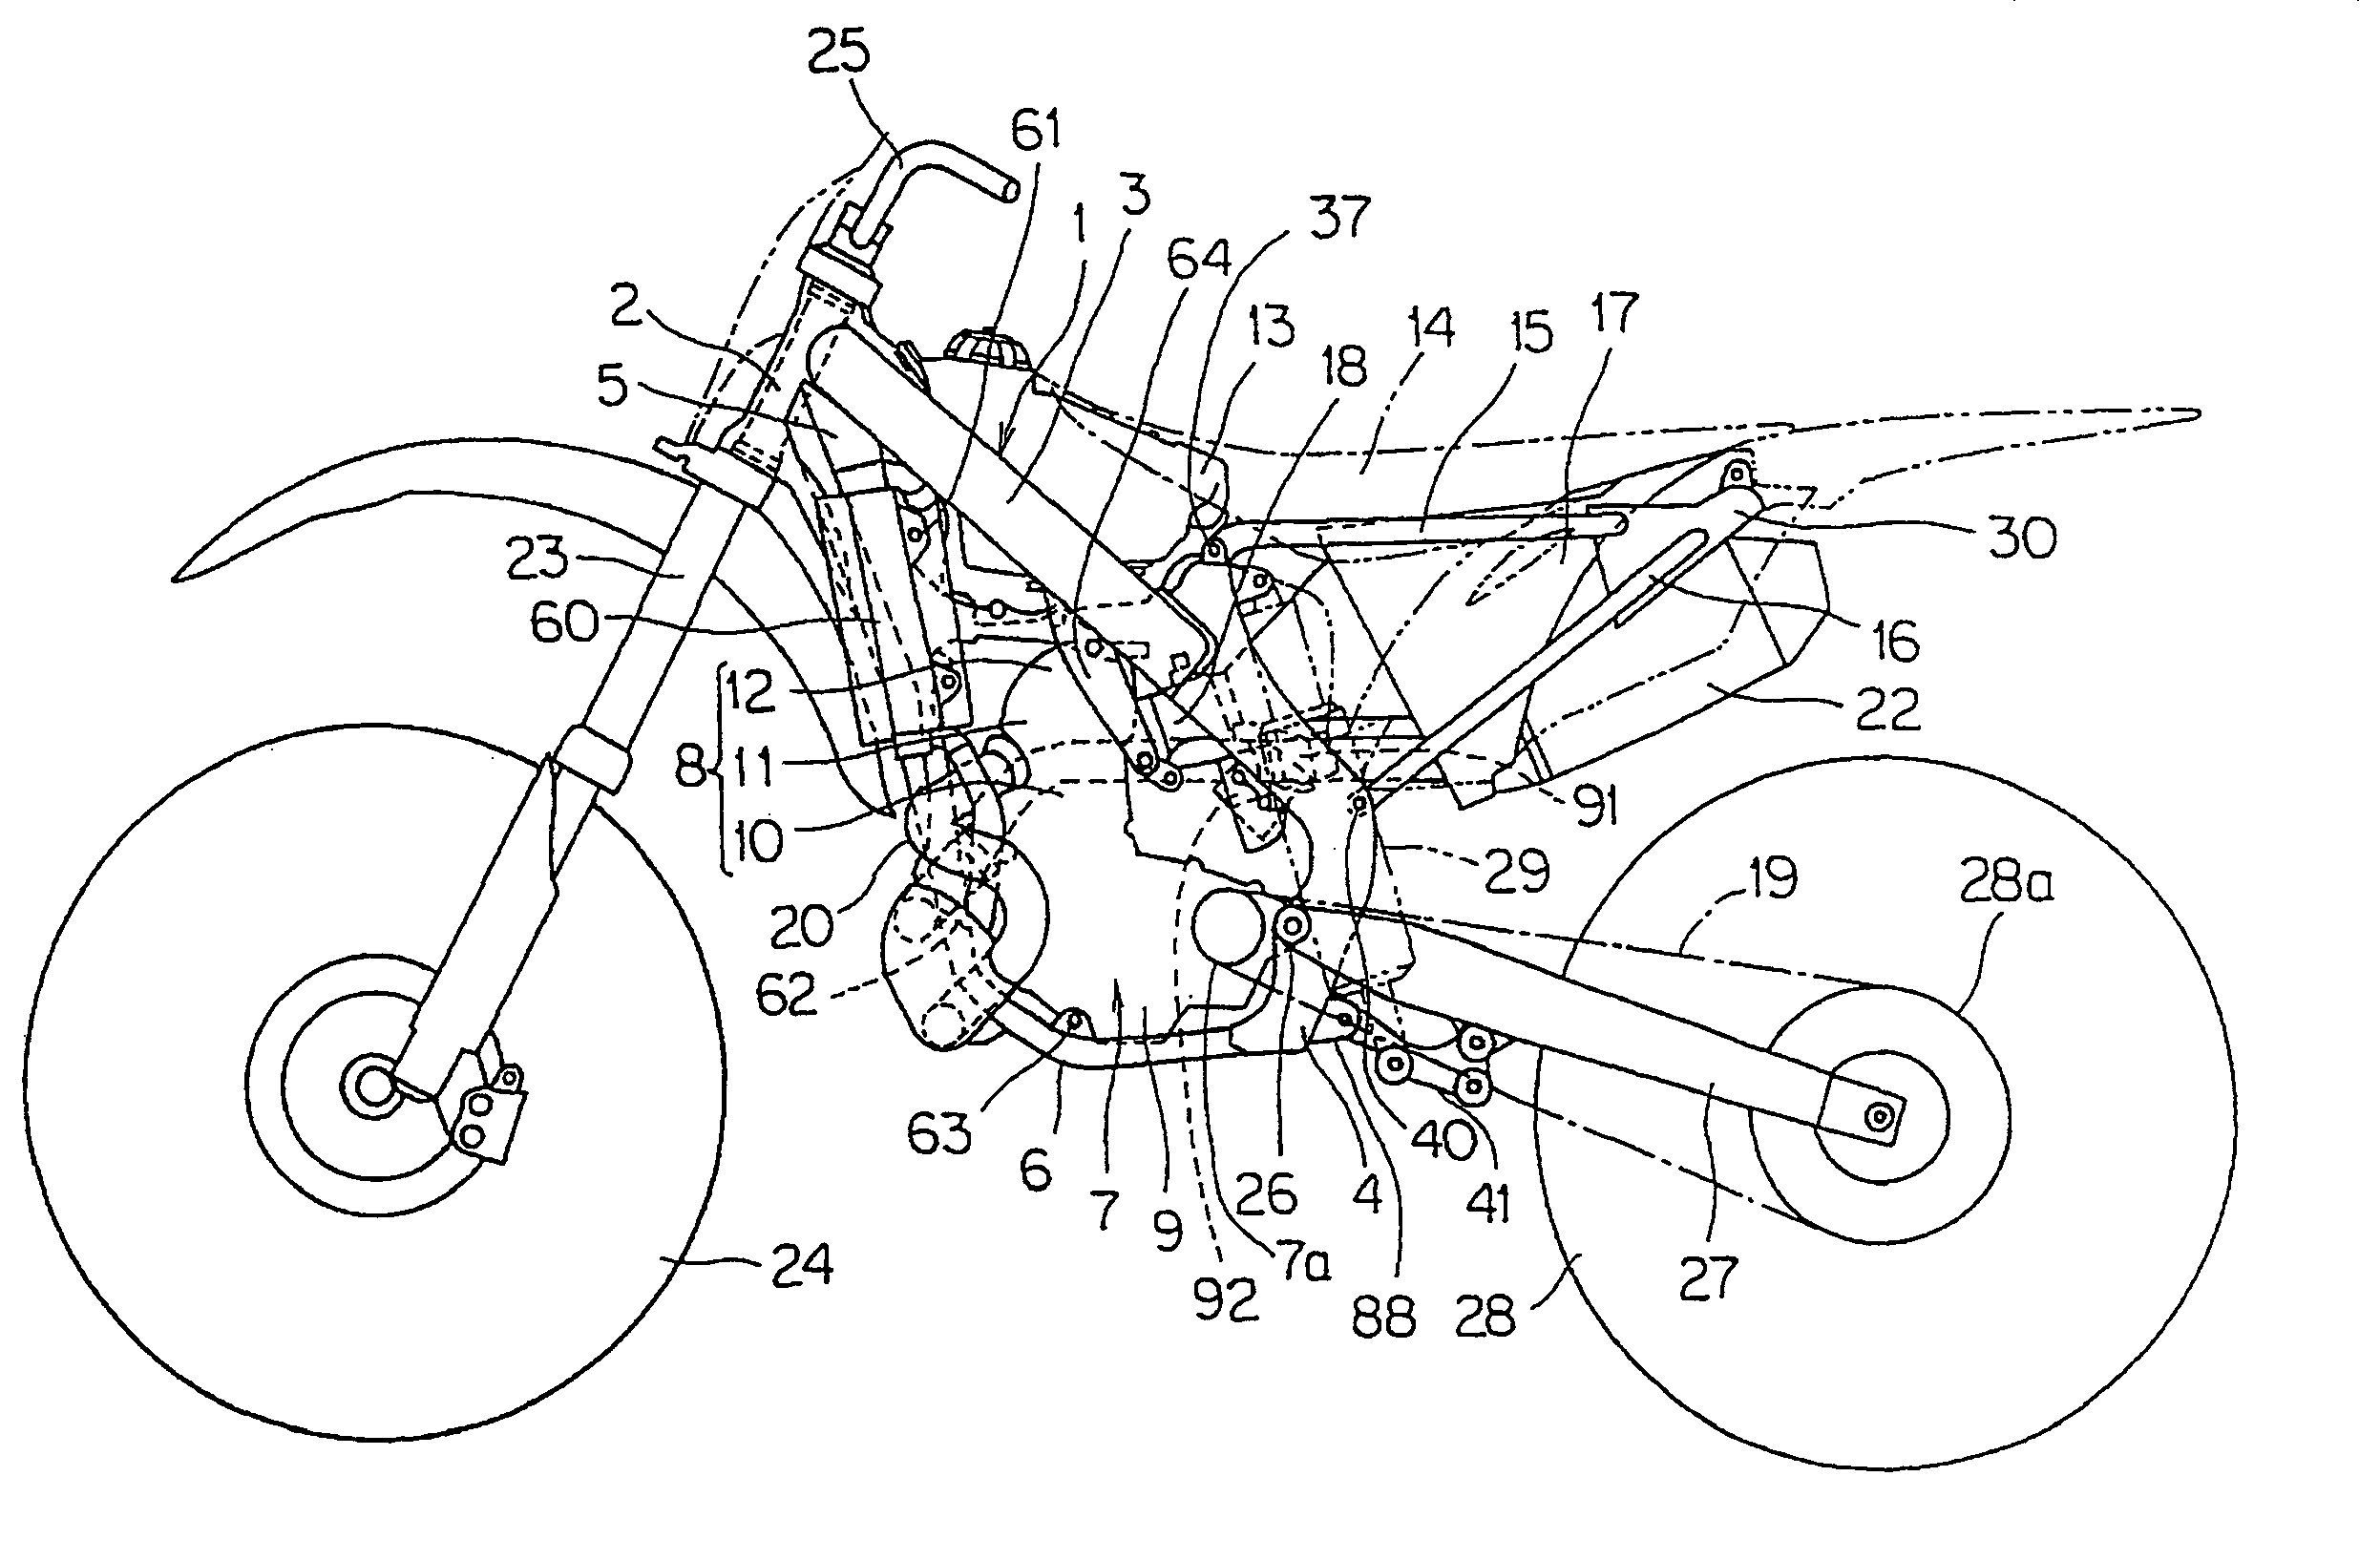 Electrical component attachment structure for two-wheeled vehicle